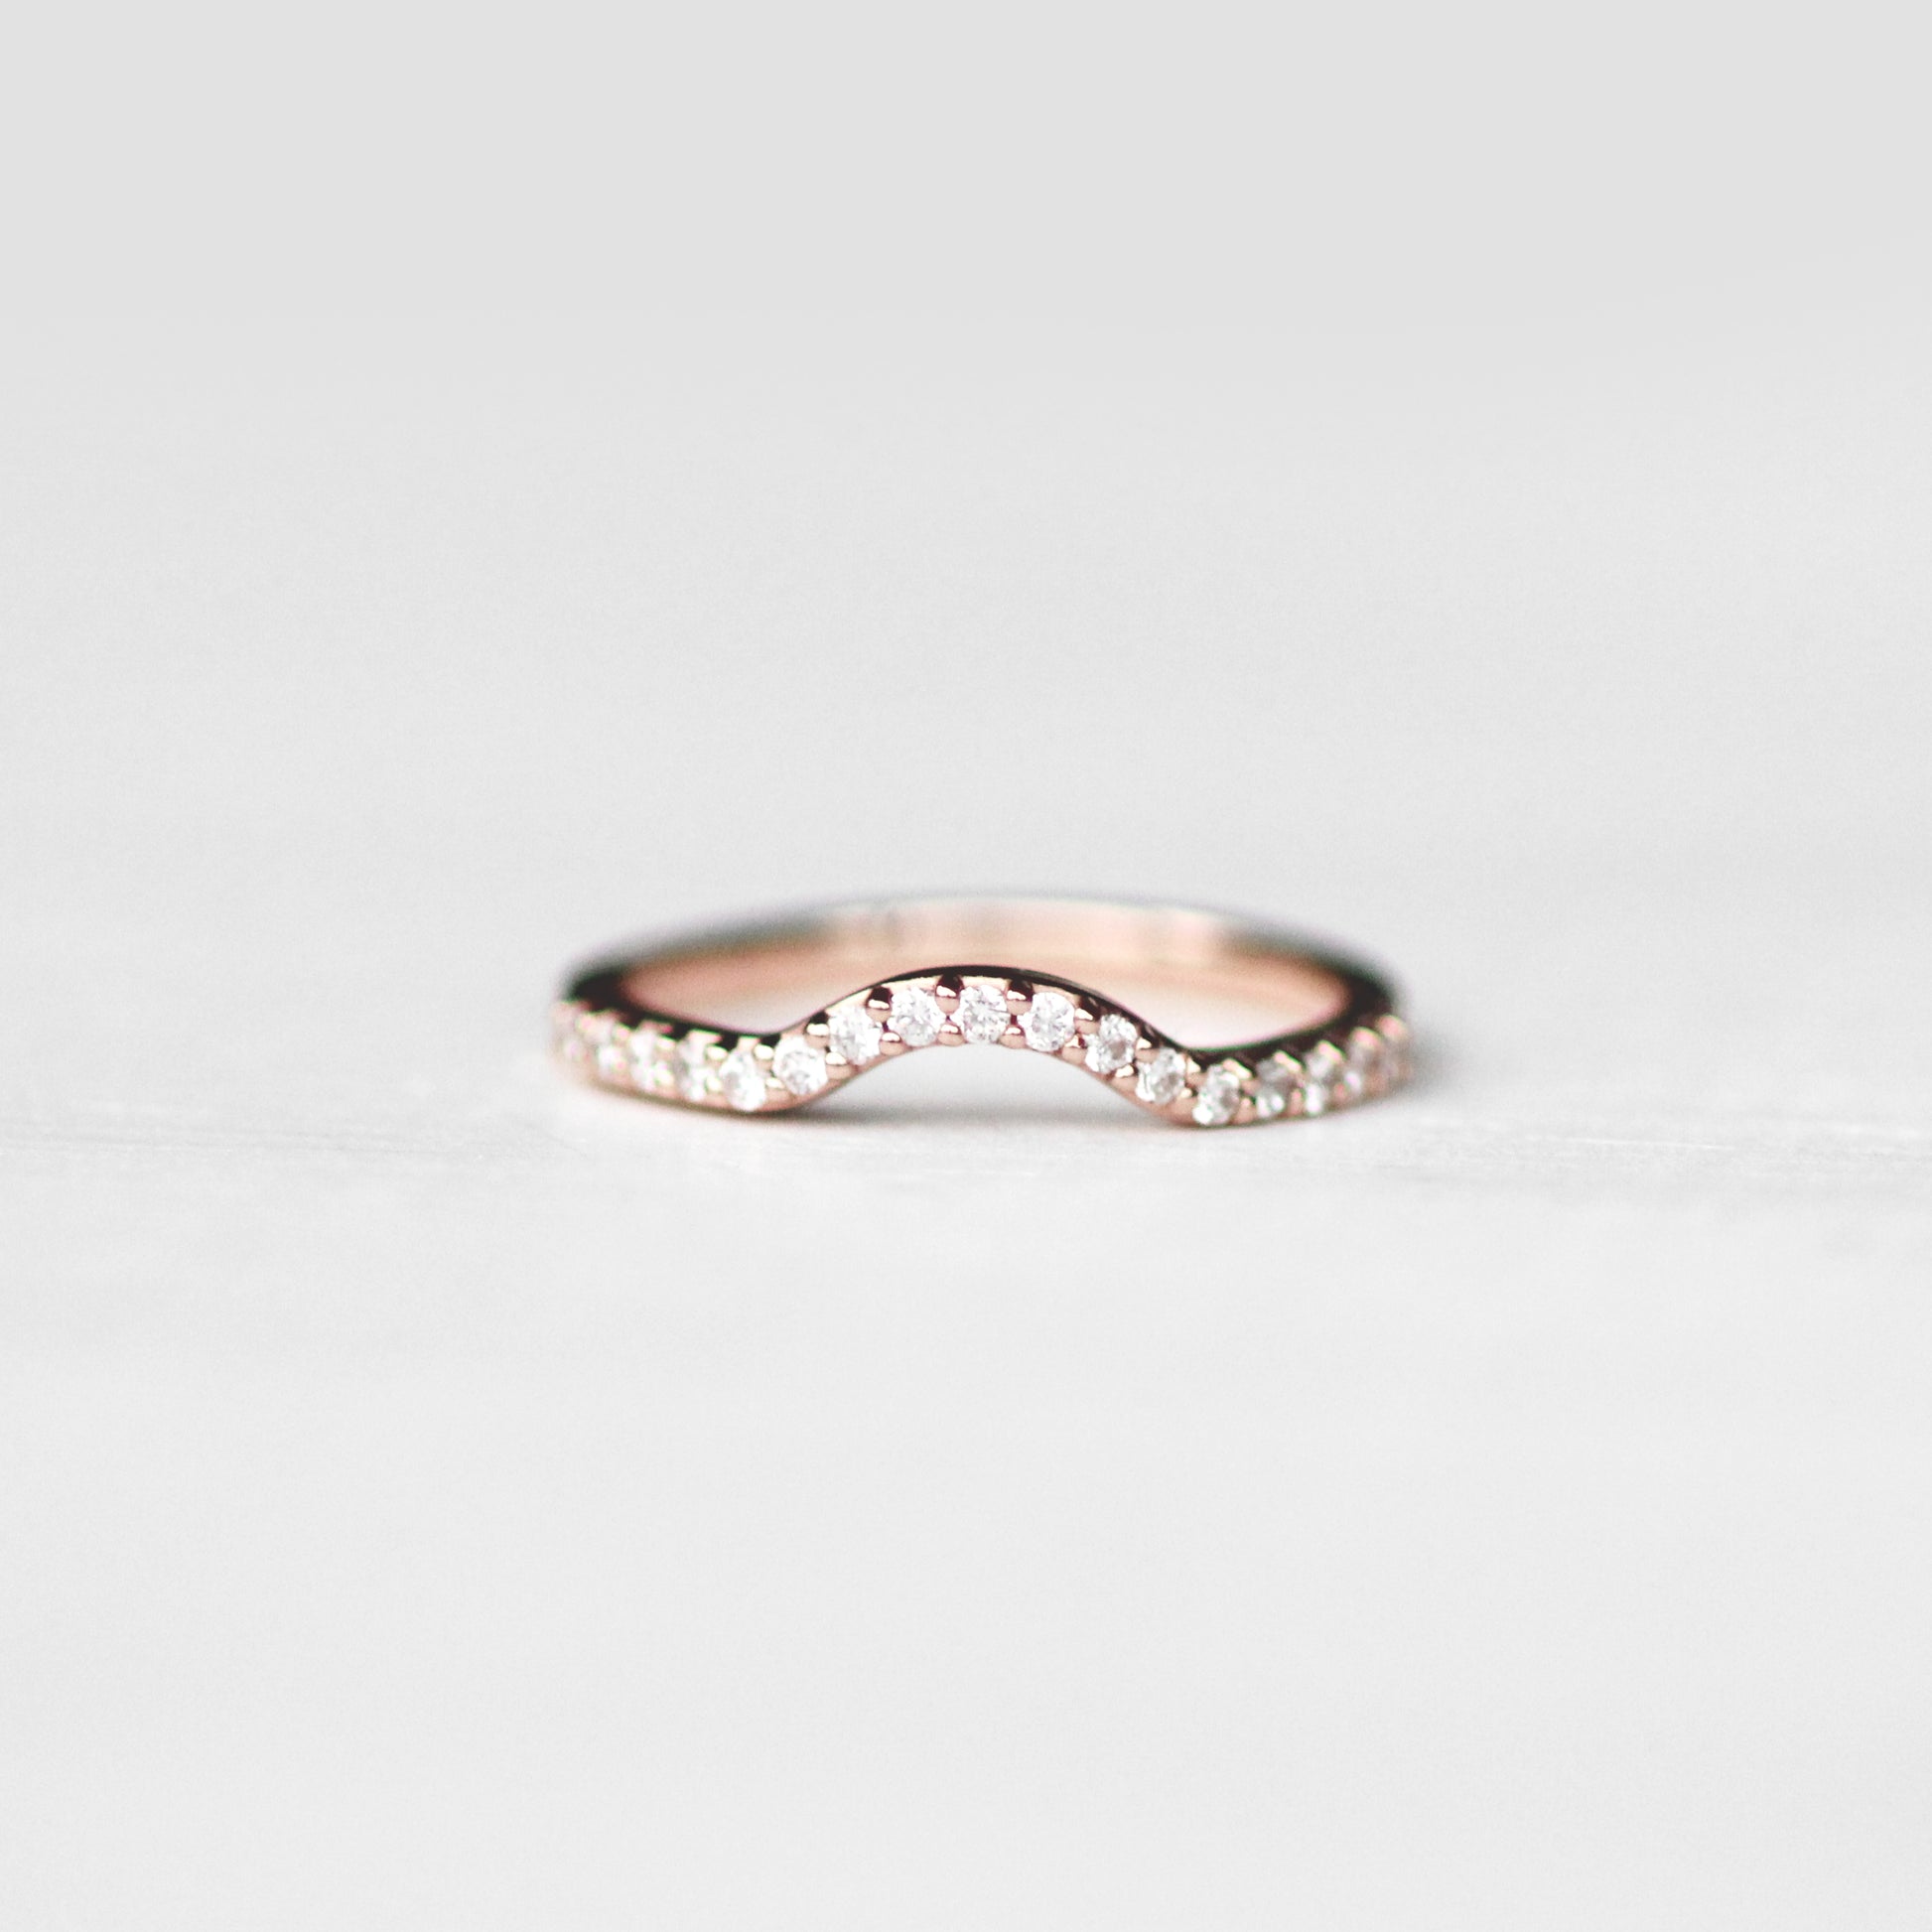 Walsh Wedding Band - Curved Contour Diamond Band - 14K Gold of Choice - Midwinter Co. Alternative Bridal Rings and Modern Fine Jewelry